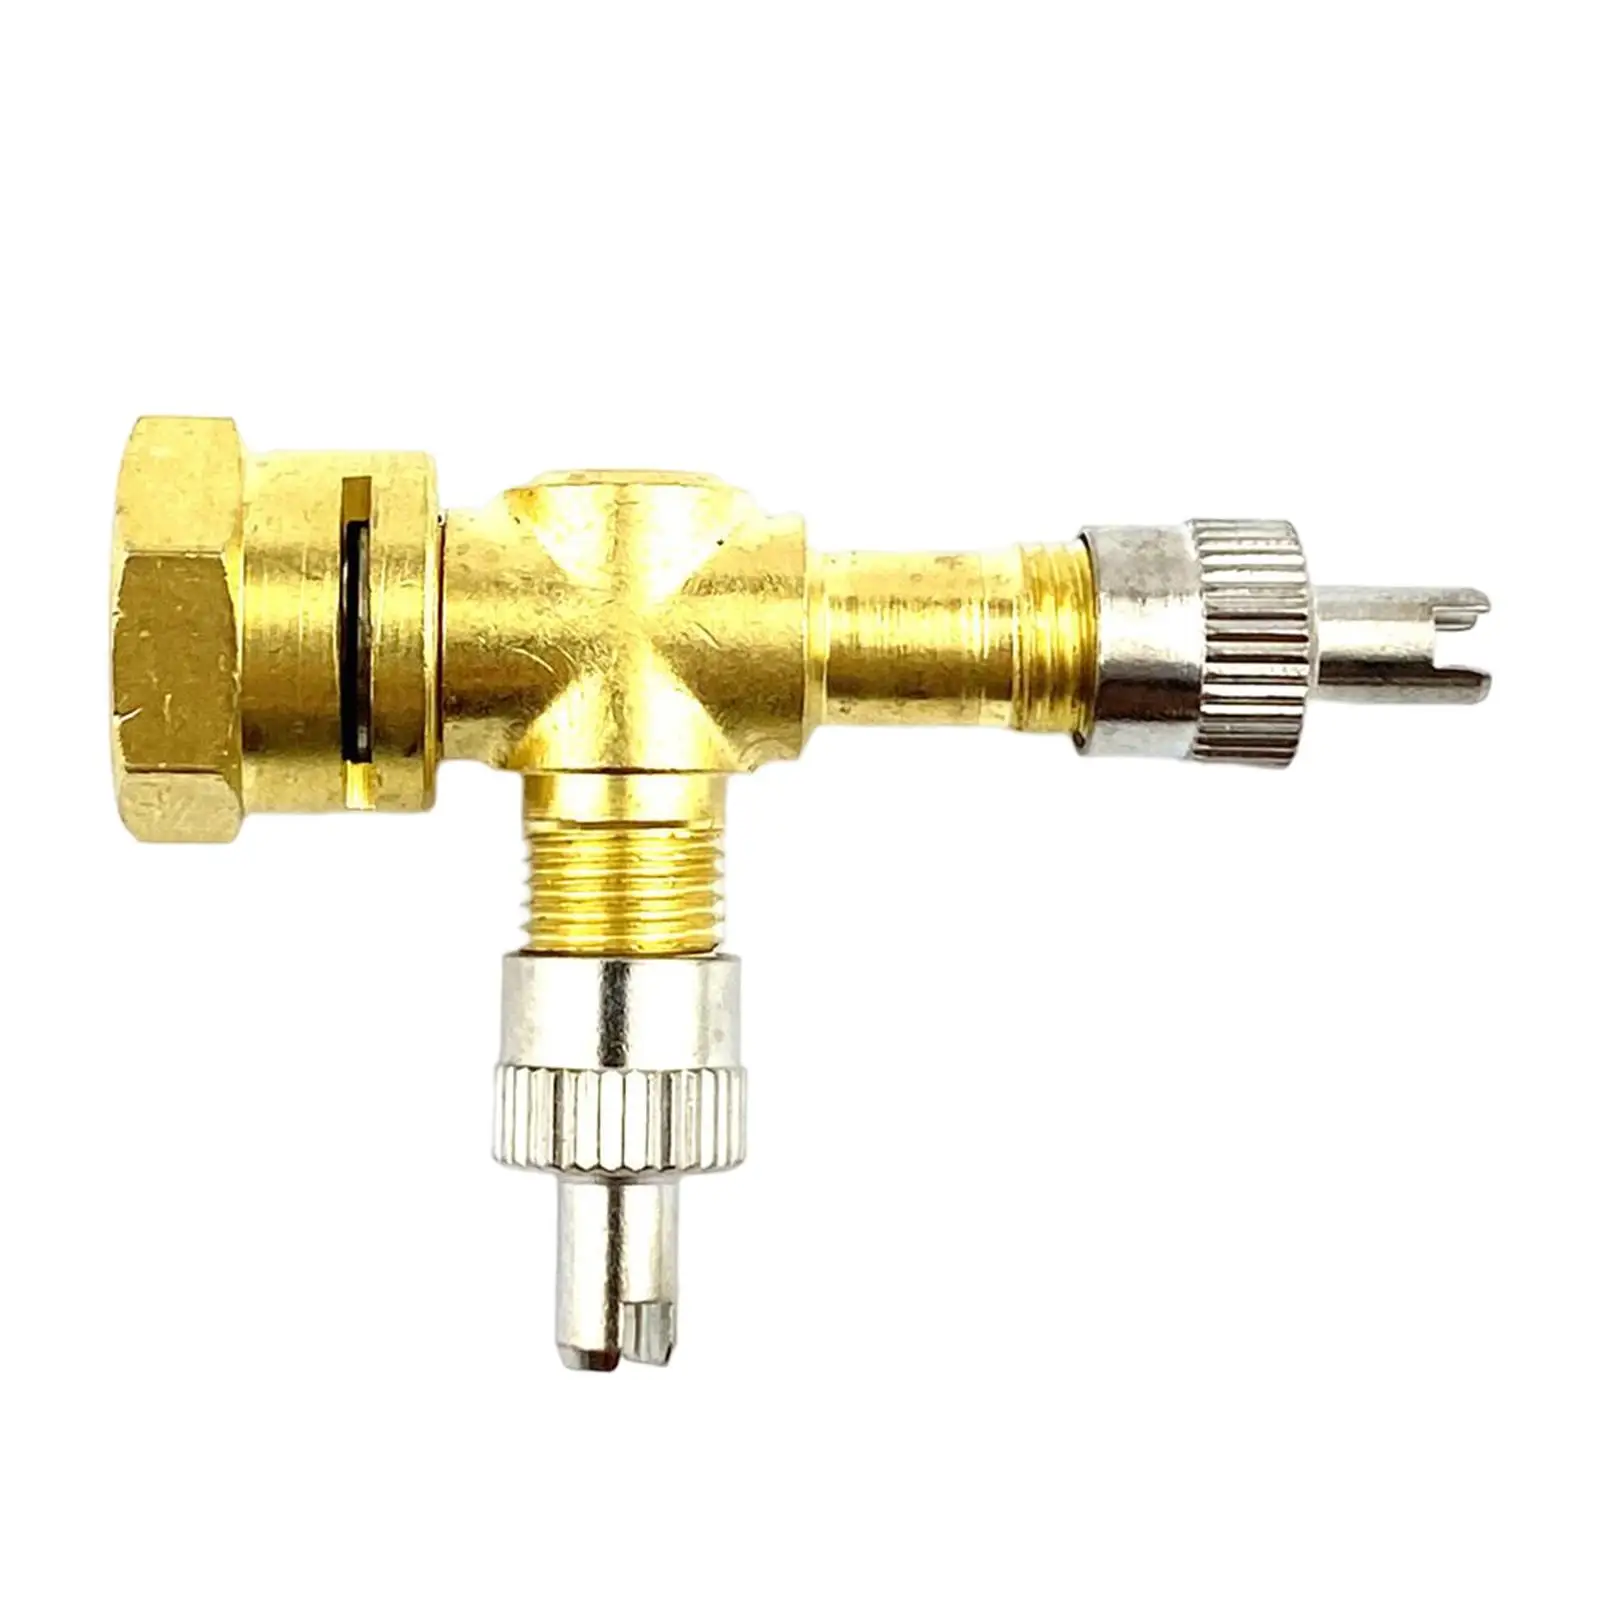 Tire valves Nozzle Copper Wheel Repair Accessories Garage Tool for Motorcycles